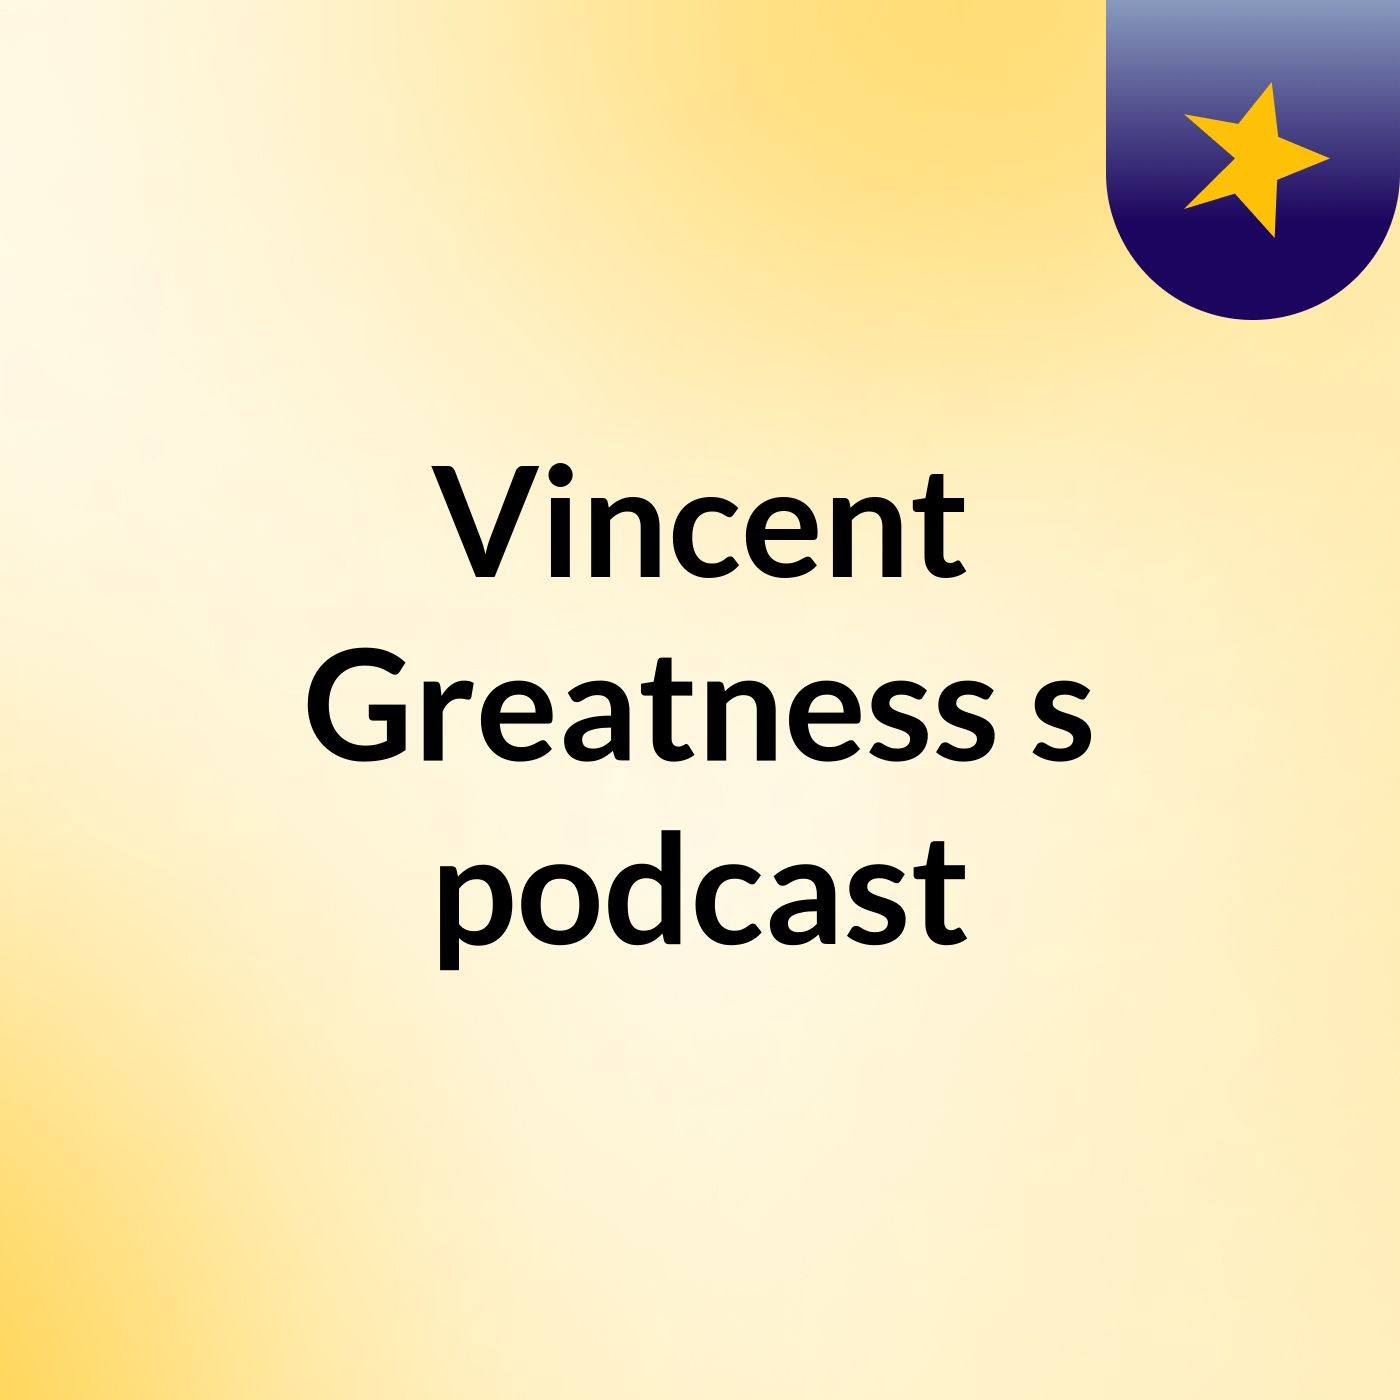 Vincent Greatness's podcast